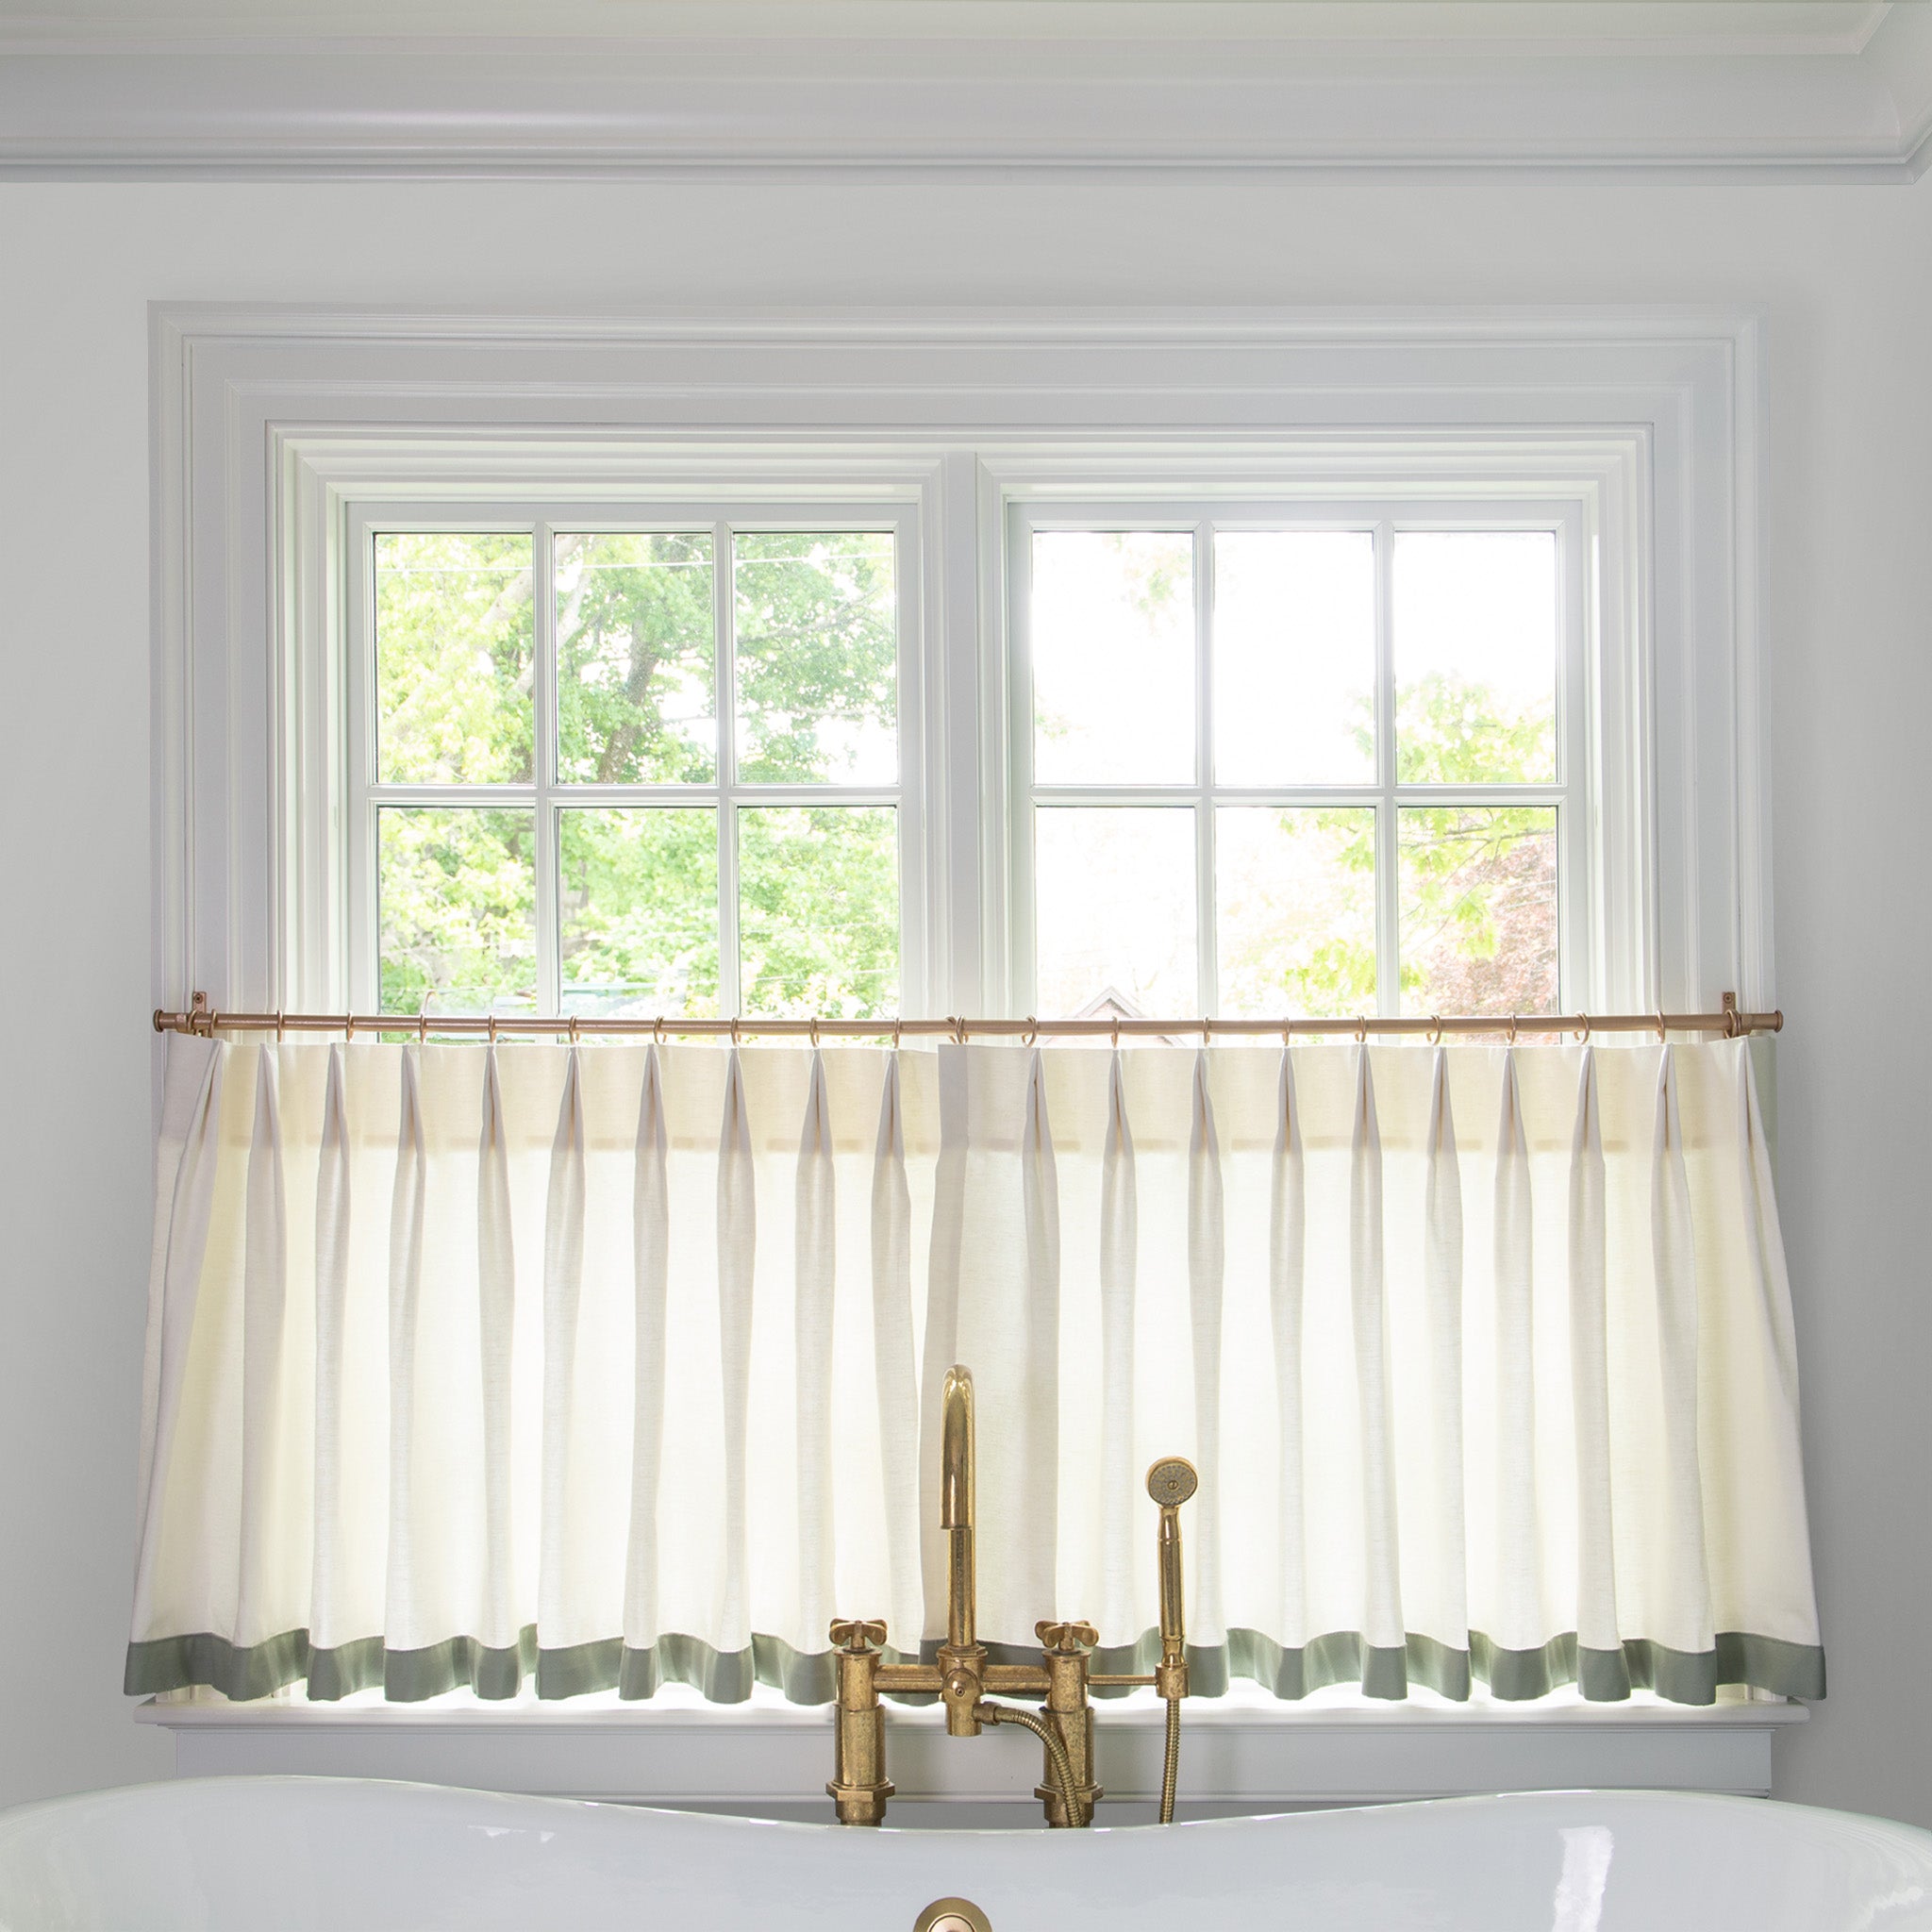 Natural White Linen fabric curtain hung on a metal rod in front of an illuminated window in a bathroom